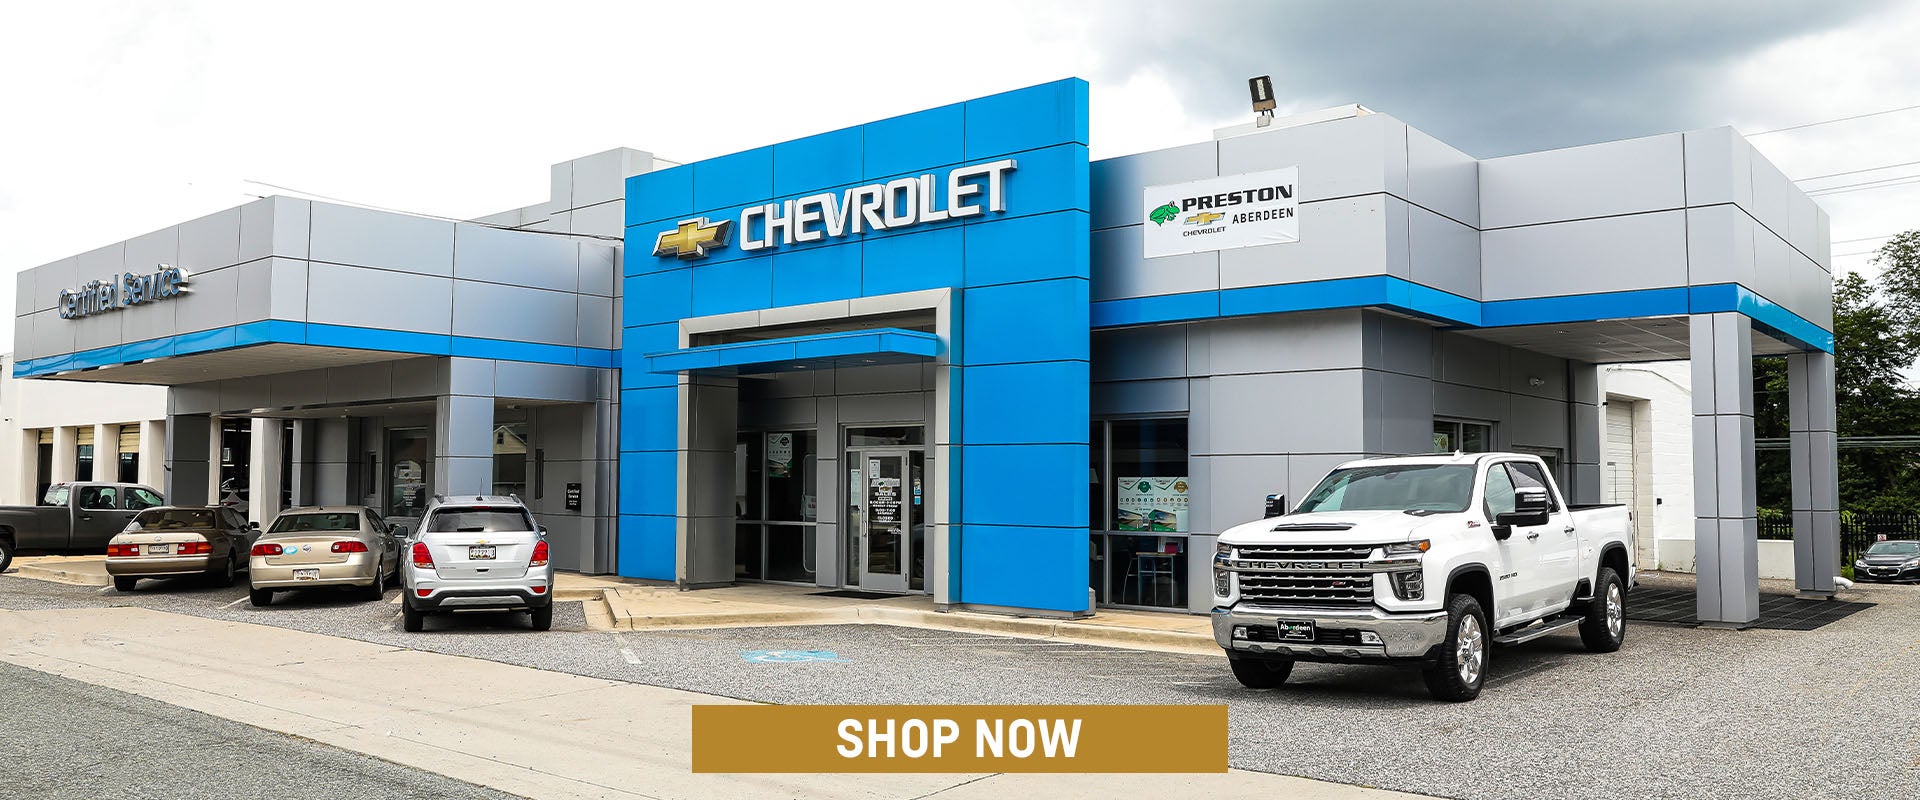 Chevy dealership Baltimore MD